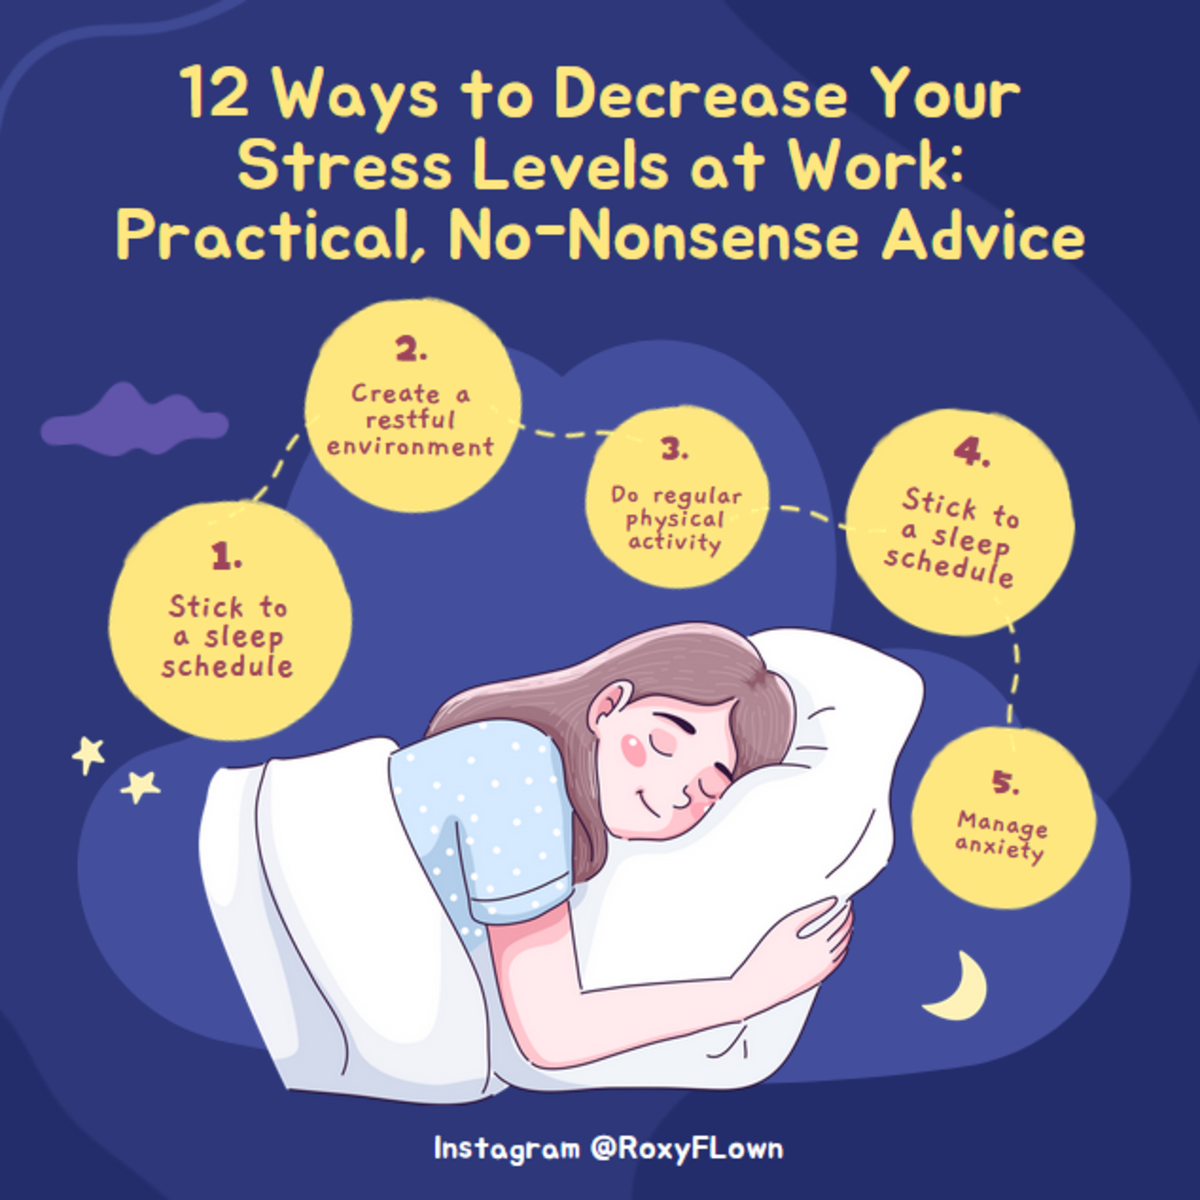 12-ways-to-decrease-your-stress-levels-at-work-practical-no-nonsense-advice